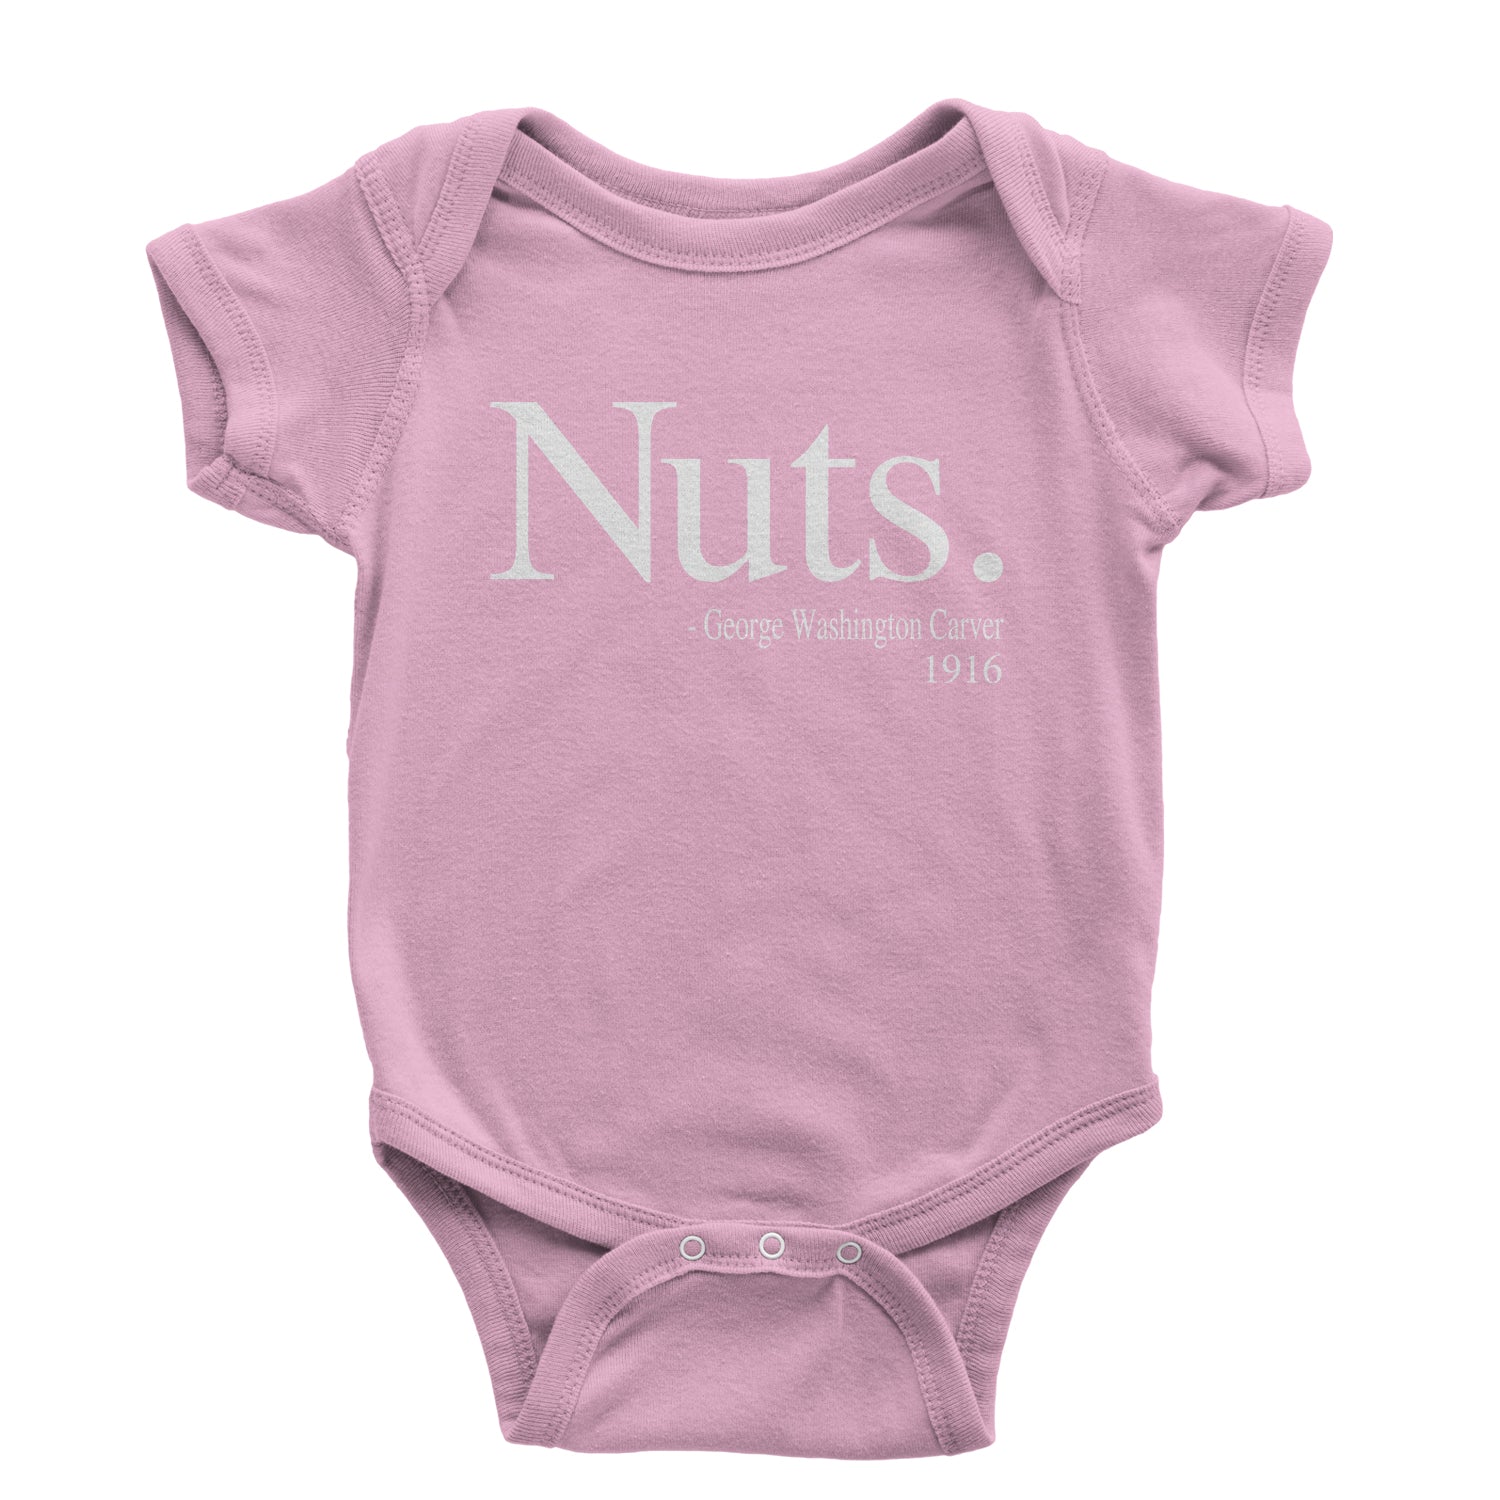 Nuts Quote George Washington Carver Infant One-Piece Romper Bodysuit african, african american, afro, american, black, carver, george, go, harriet, history, malcolm, me, nah, nuts, out, parks, rosa, try, tubman, washington, we, x by Expression Tees